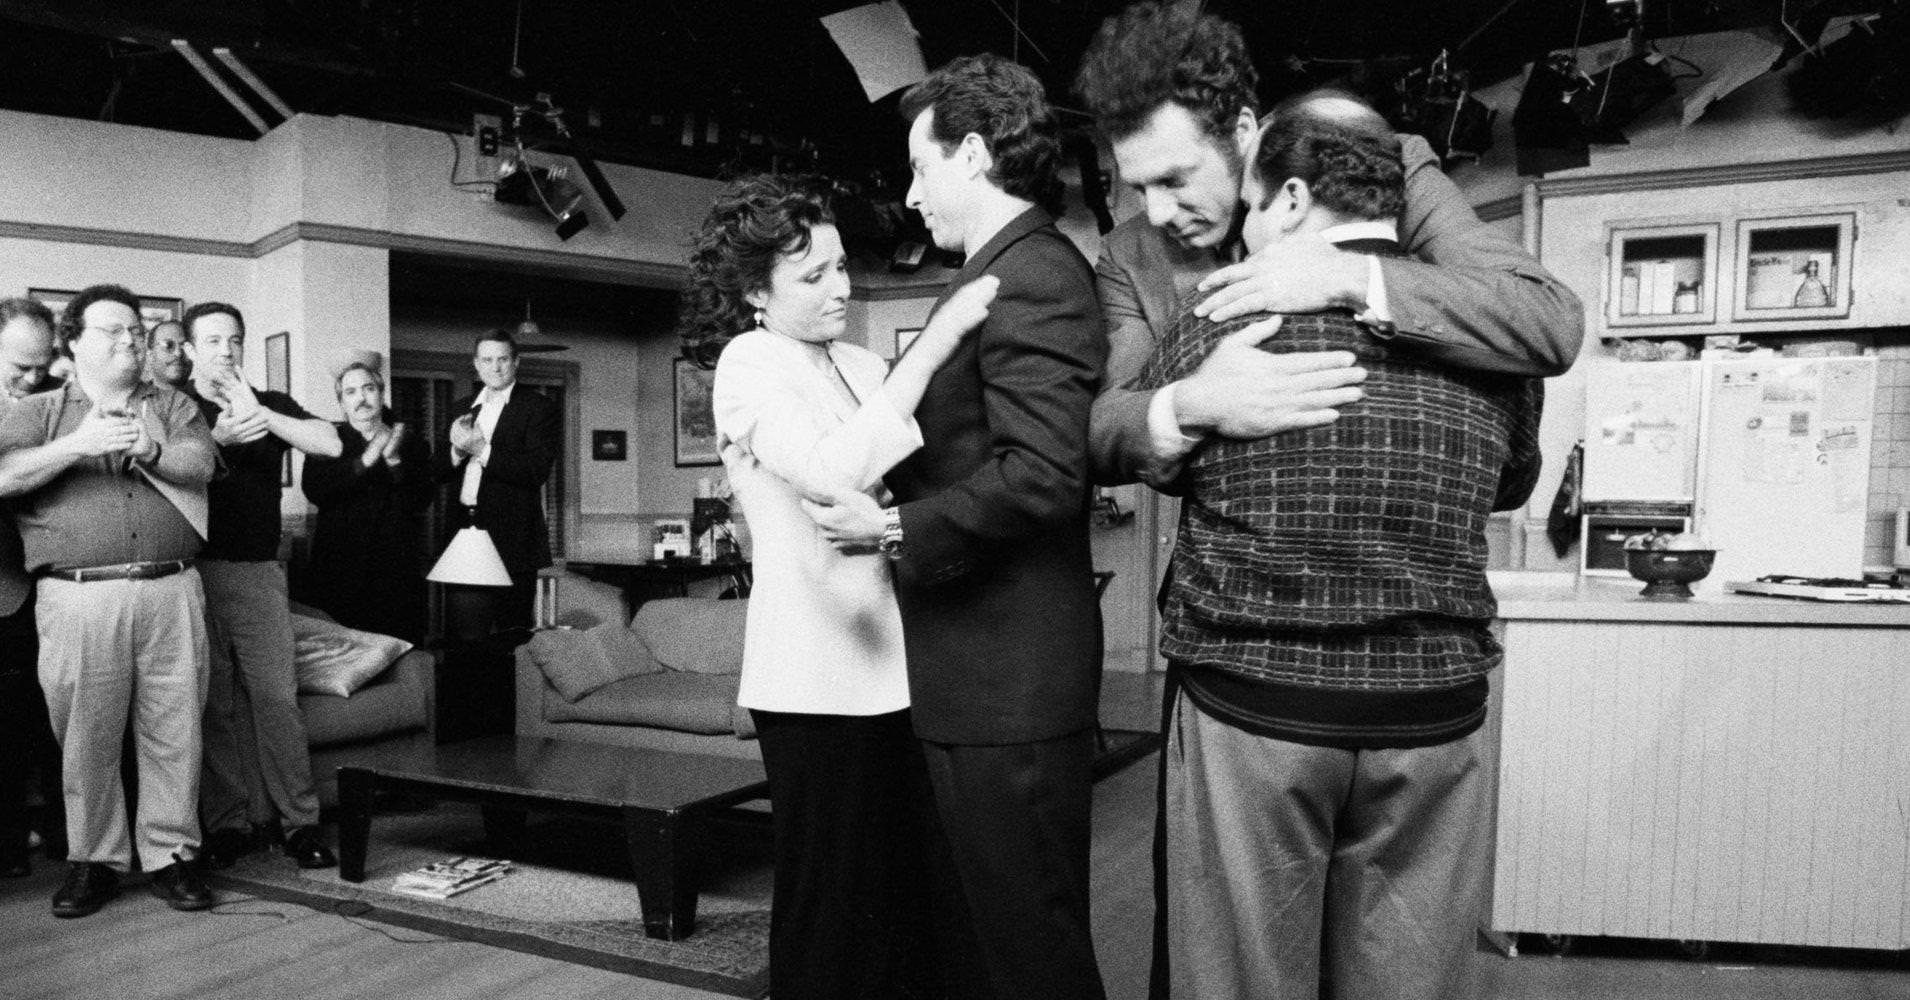 The Seinfeld cast during the last days of filming, 1998